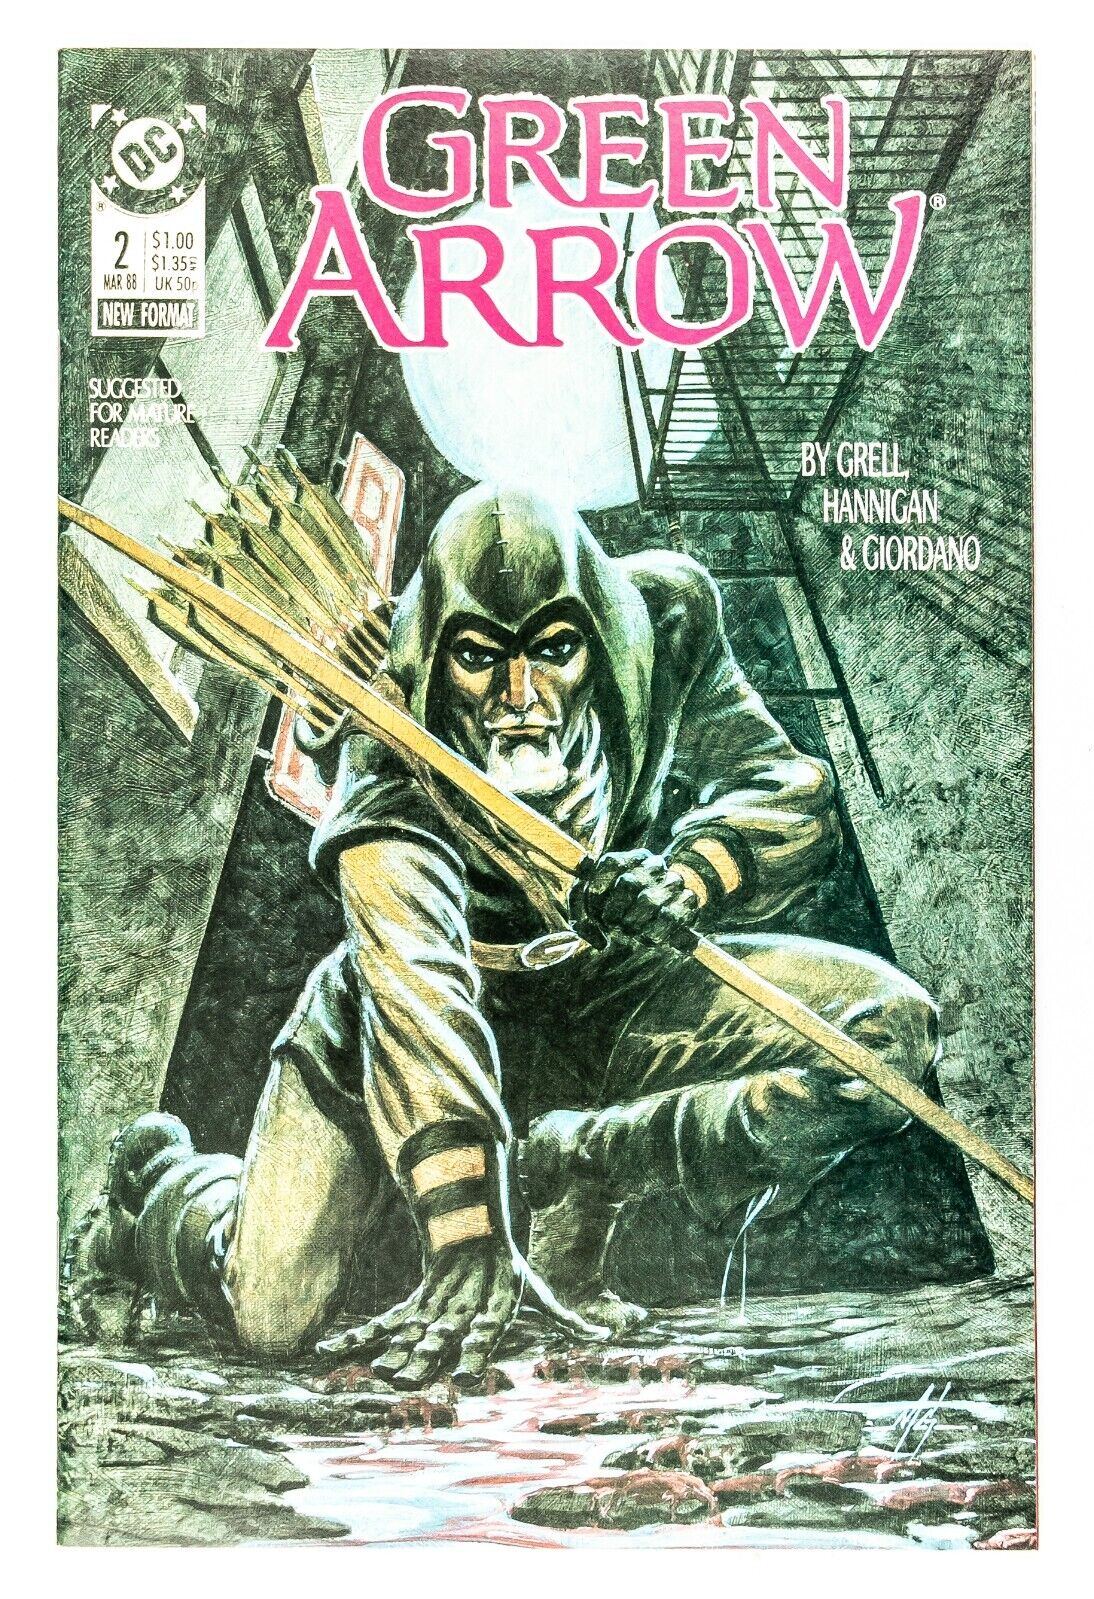 Green Arrow #2 (1988 DC, Vol. 2) Hunter's Moon by Mike Grell, Unread! NM-